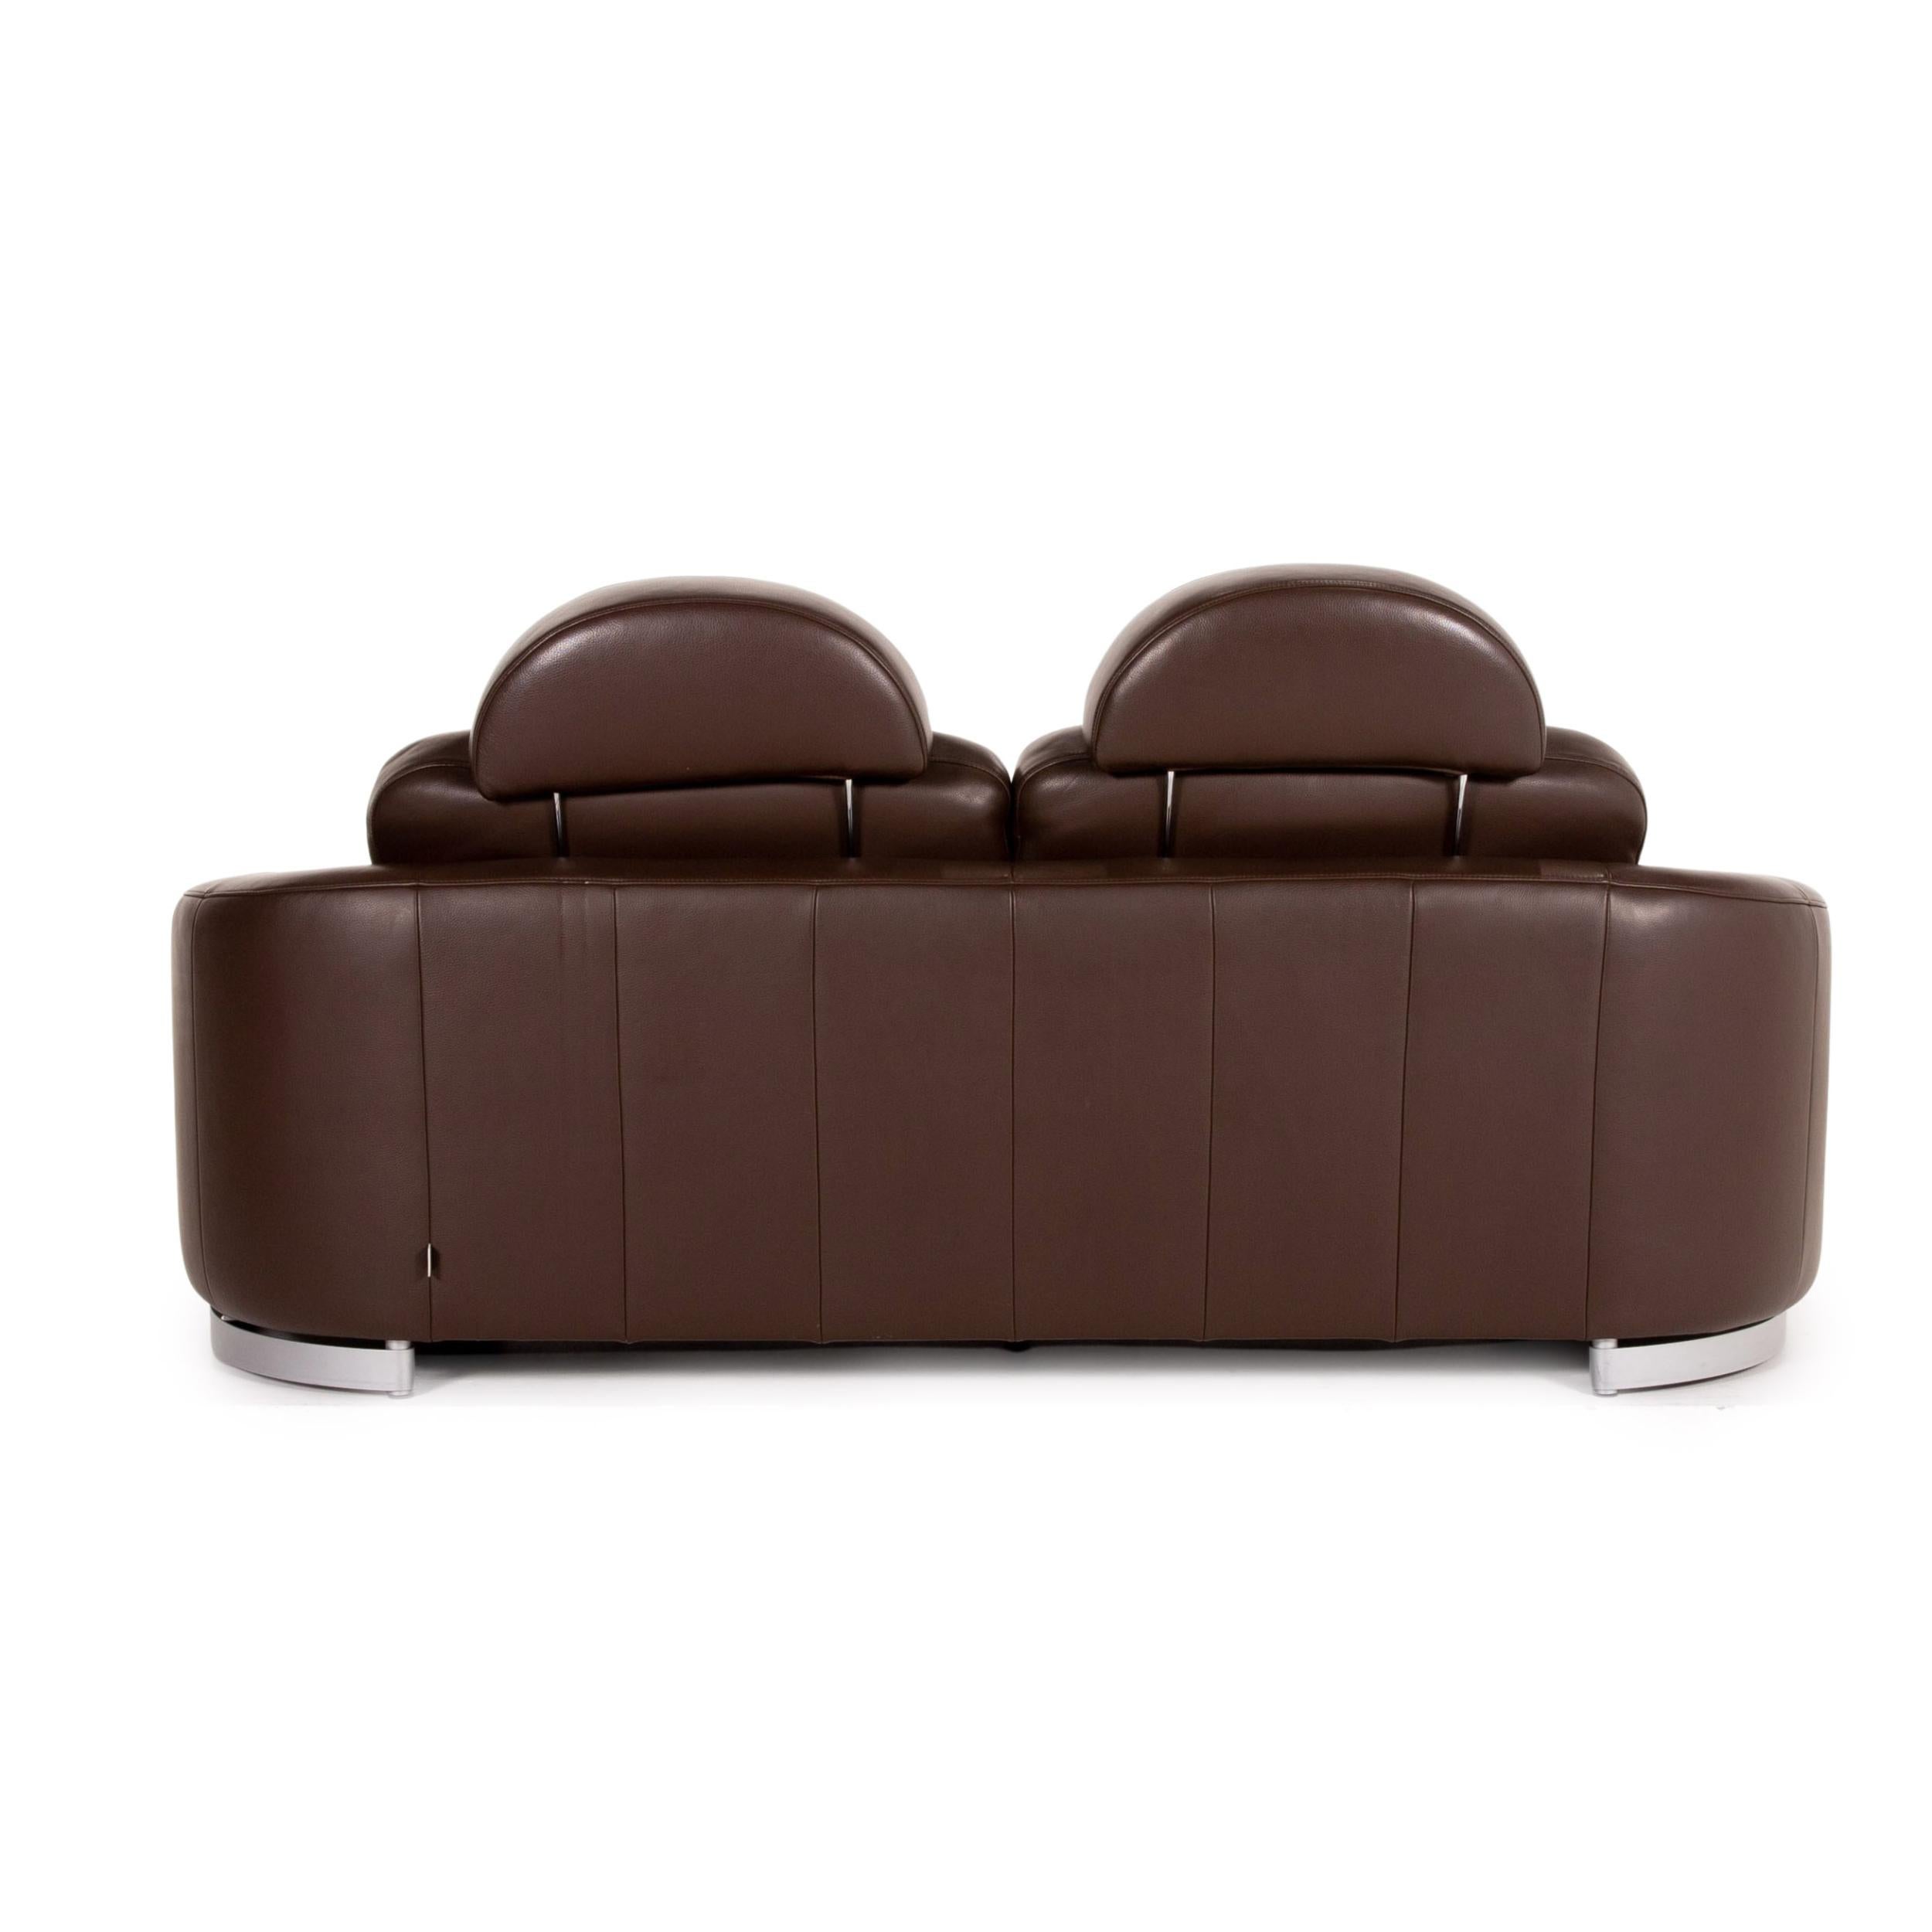 Ewald Schillig Leather Sofa Set Brown Dark Brown 2x Two-Seater For Sale 13